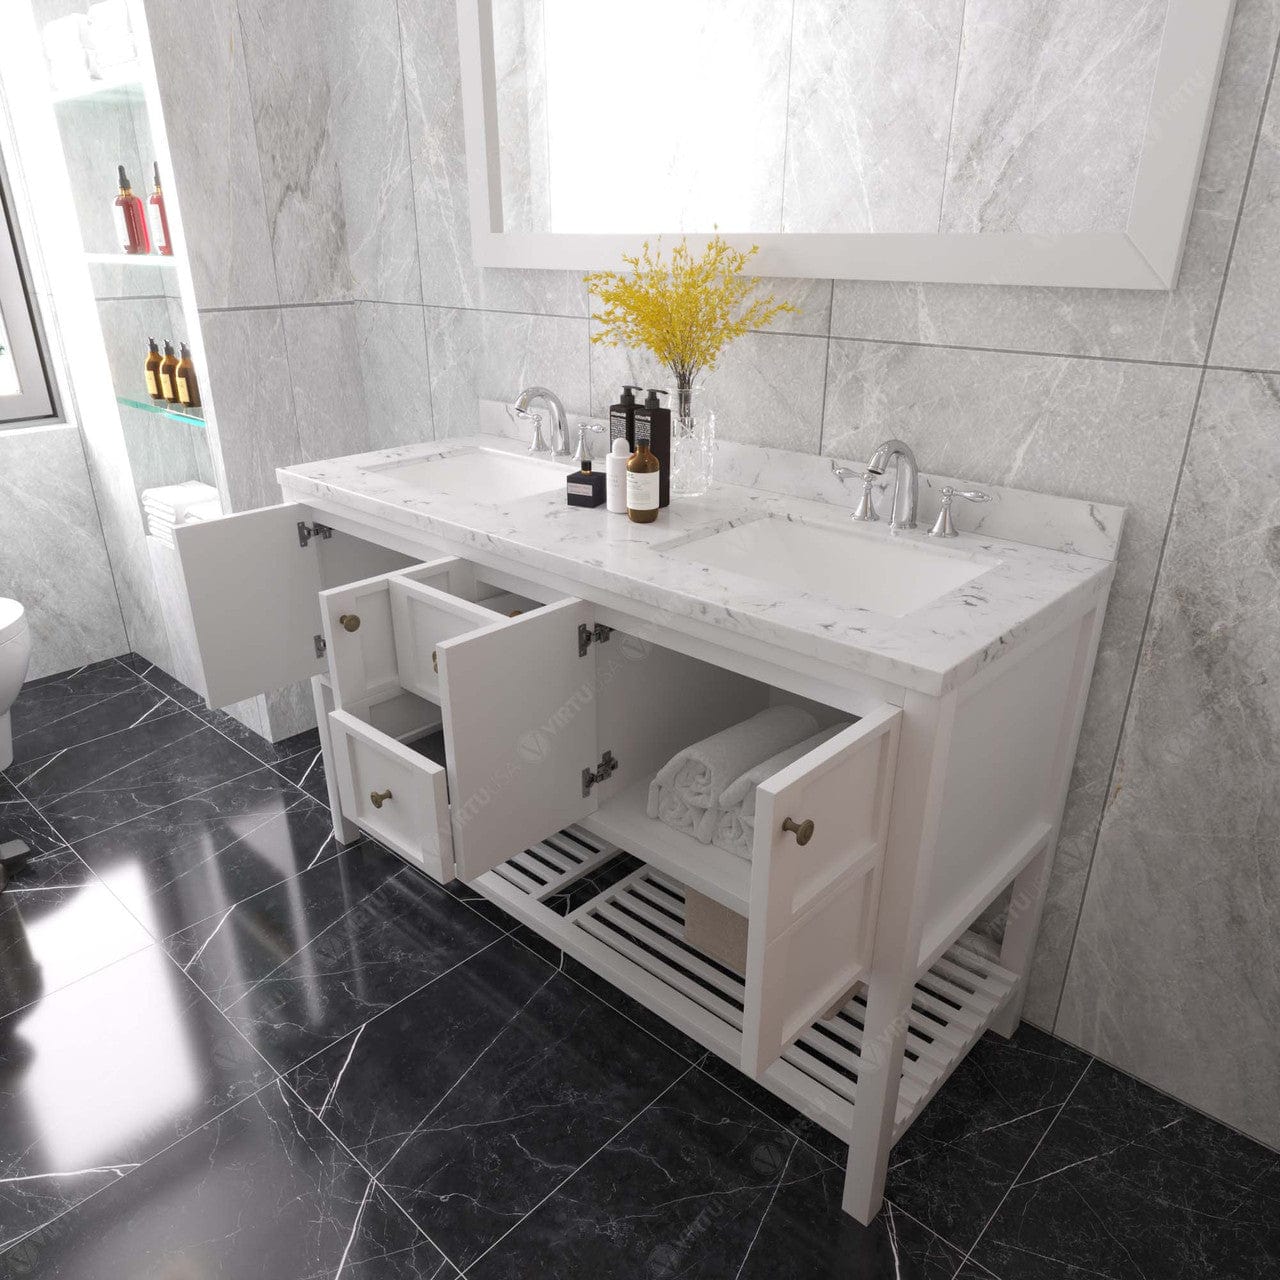 Winterfell 60" Bath Vanity in White with Marble Quartz Top drawers open